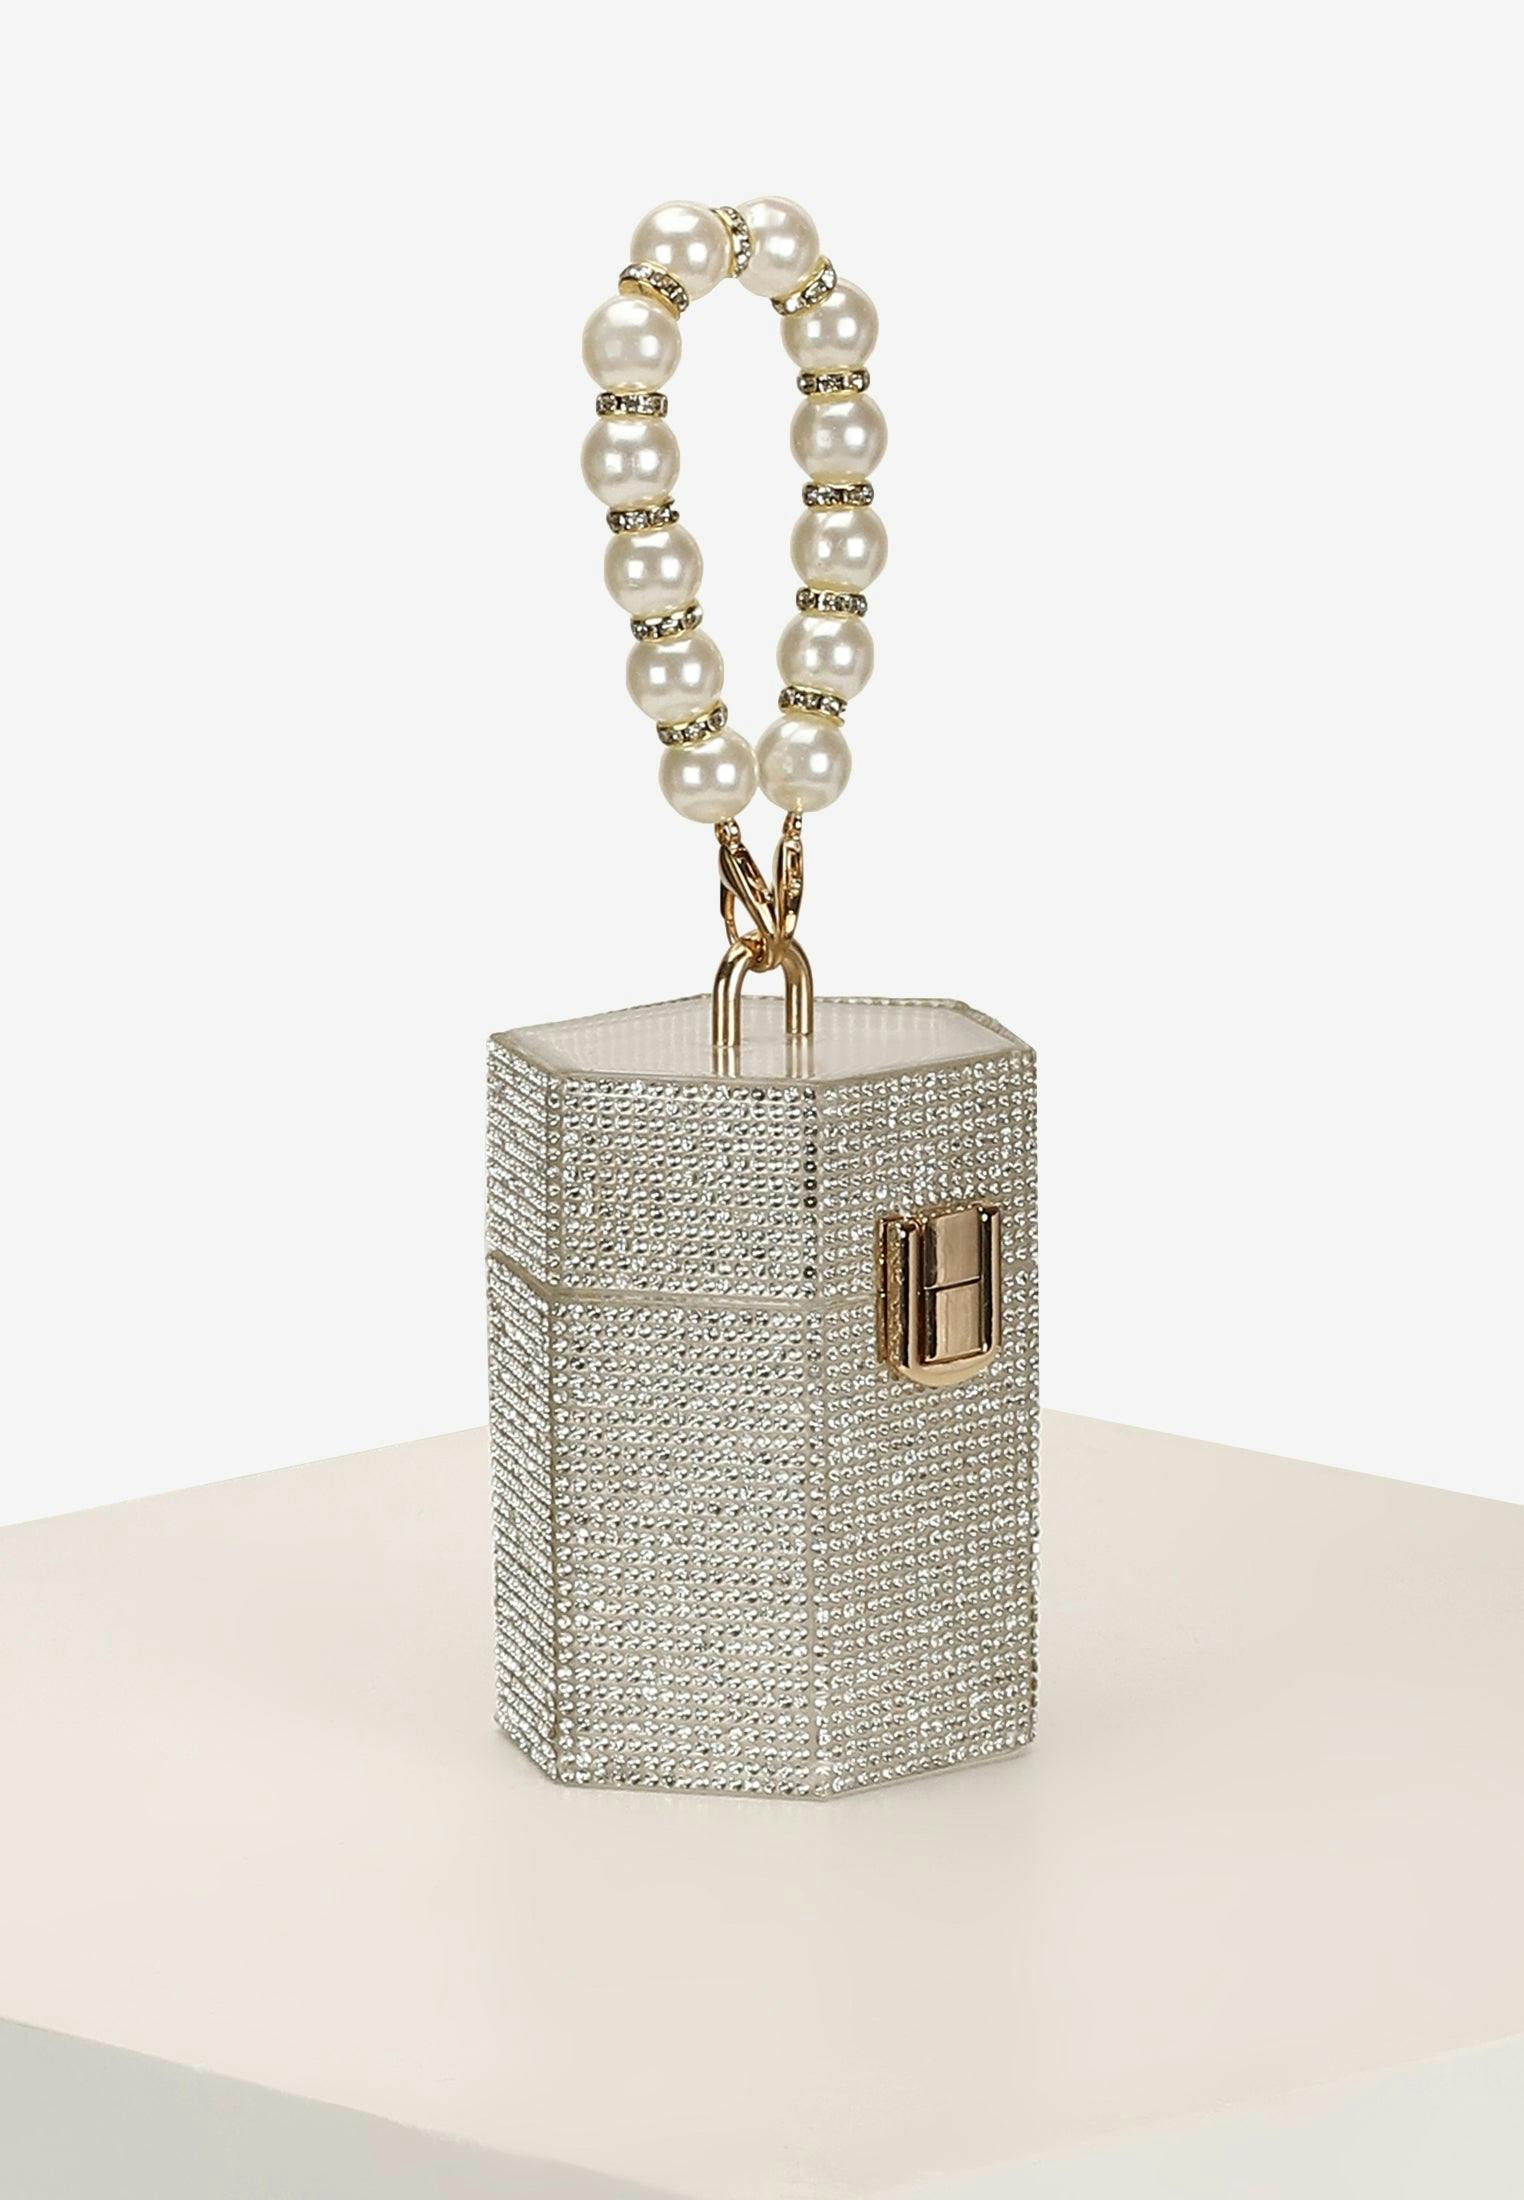 Miniaudre Clutch in Silver Diamanté, a product by Lola's